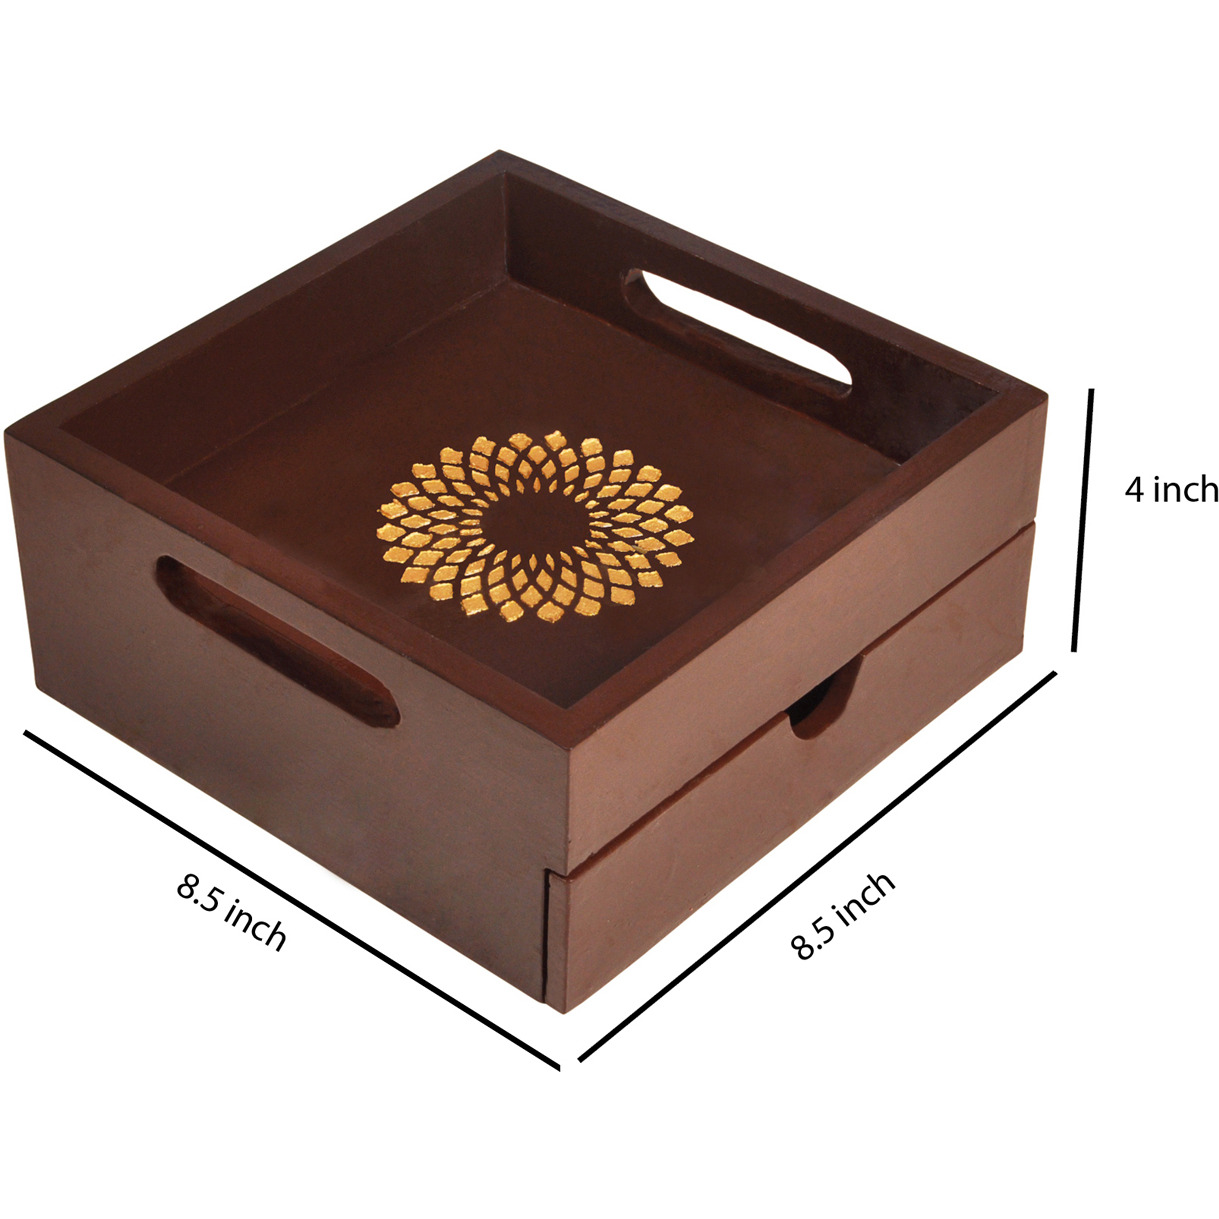 Home & Kitchen Decorative Wooden Hand painted Serving Tray with Drawer (Size: 8.5x8.5x4, Color: Brown)